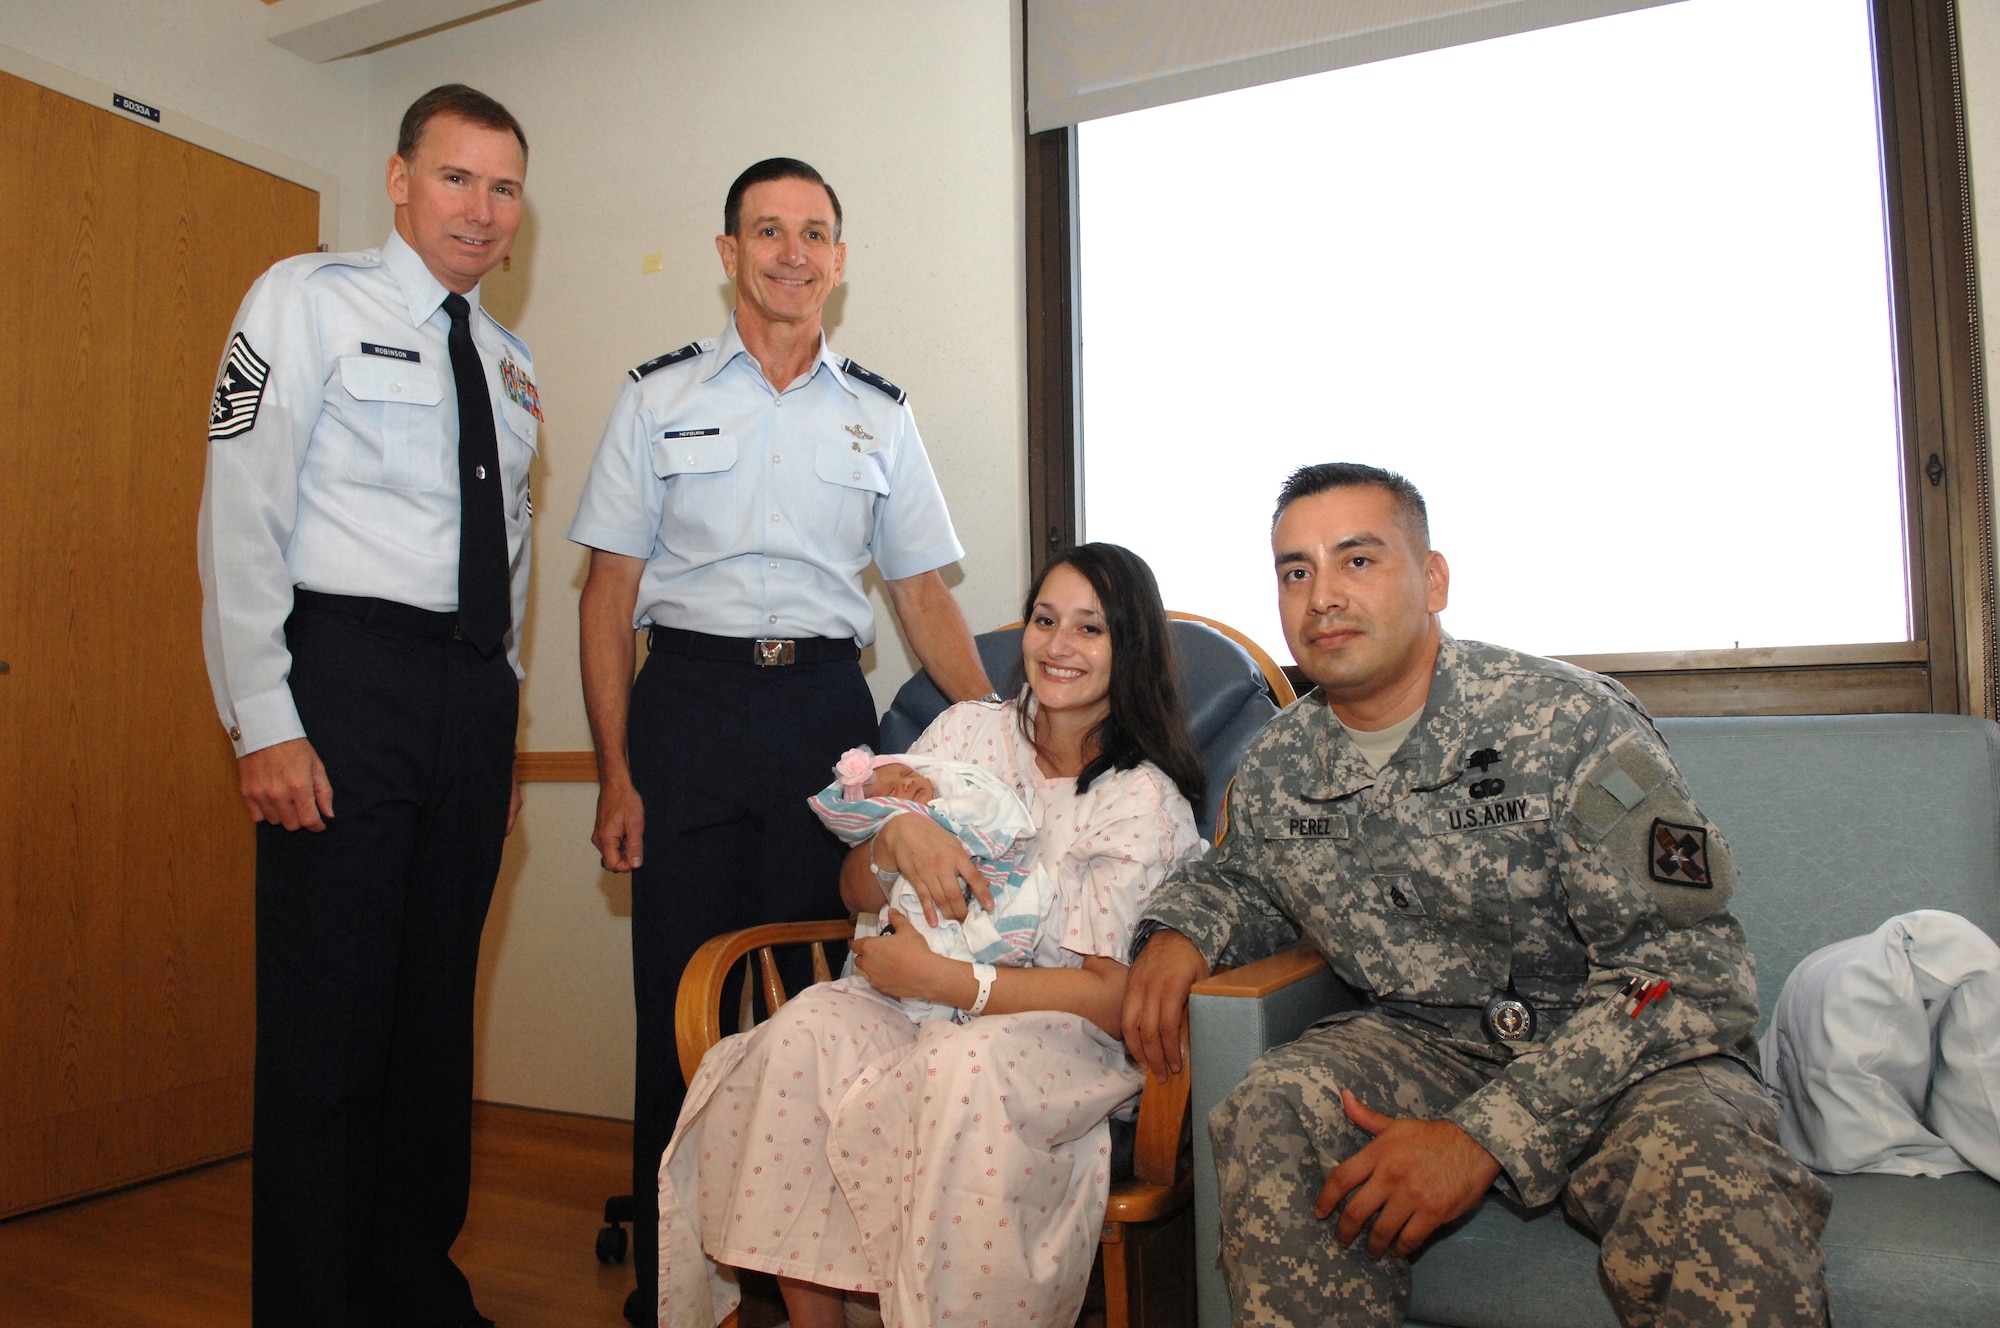 Air Force Chief Master Sgt. Richard Robinson (far left) and Maj. Gen. Byron Hepburn (center left) visit Mrs. Dina Perez, Army Staff Sgt. Mario Perez and baby Laurel Perez, who made history on Aug. 28, 2011. Laurel was the last baby born at Wilford Hall Medical Center. The Hauth Birthing Center closed Aug. 29 and will relocate to a new state-of-the-art birthing center at Fort Sam Houston, Texas. Baby Laurel weighed 5 pounds, 6 ounces and she is 19 inches long. Perez is a nuclear medicine instructor for the Medical Education and Training Campus at Fort Sam. Hepburn is the 59th Medical Wing commander and Robinson is the 59th Medical Wing command chief. (U.S. Air Force photo/Staff Sgt. Robert Barnett) 